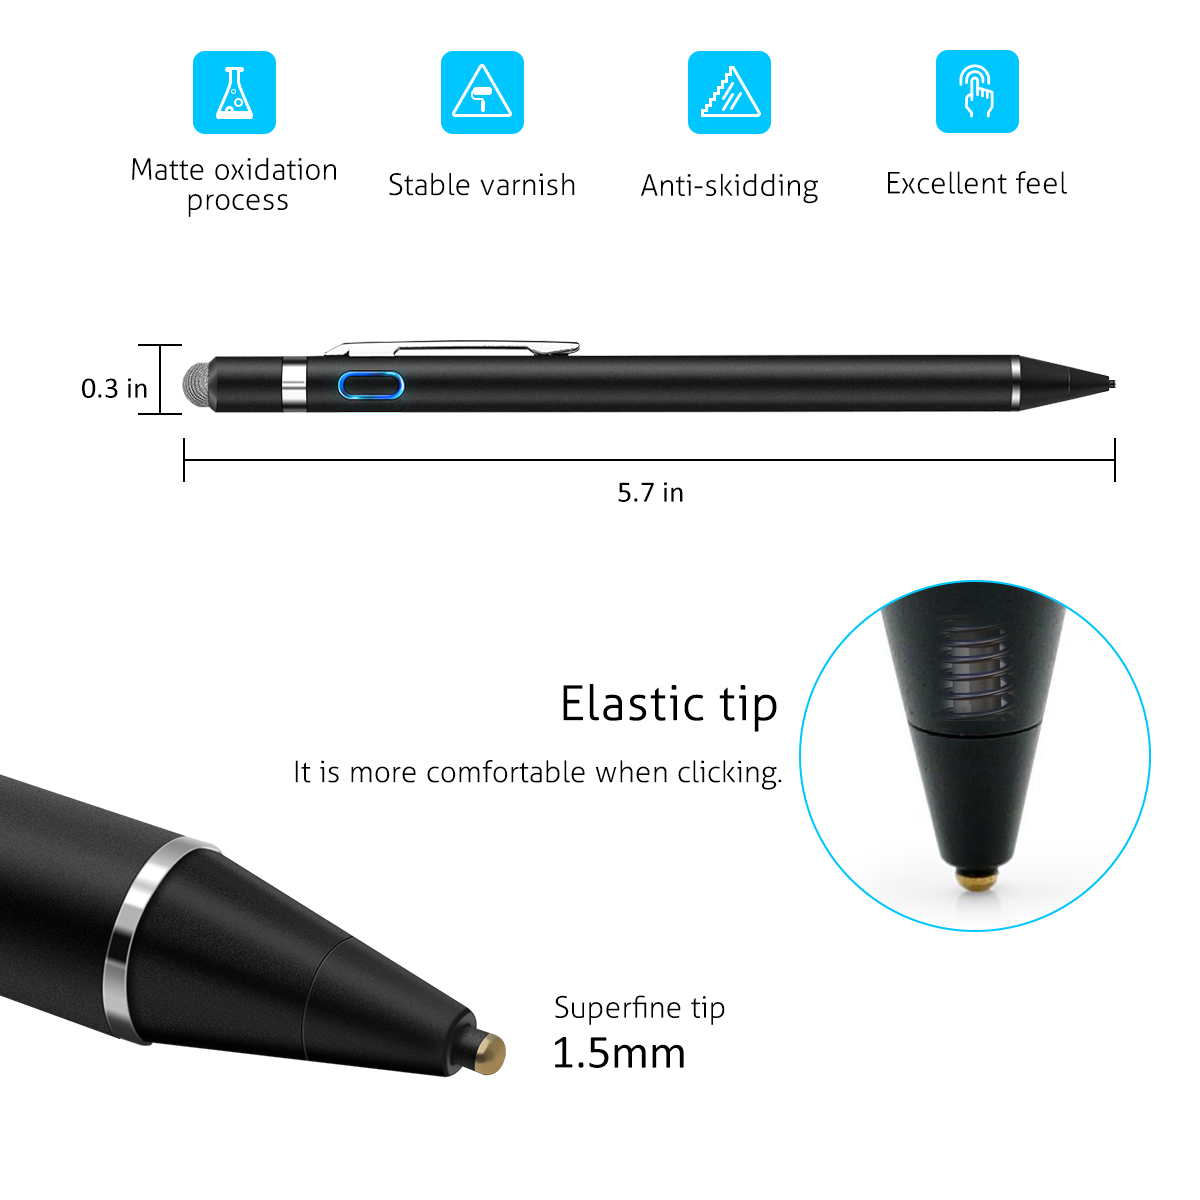 15mm-Active-Capacitive-Touch-Screen-Stylus-Pen-For-Smart-Phone-Tablet-PC-iPhone-iPad-Samsung-Huawei-1415809